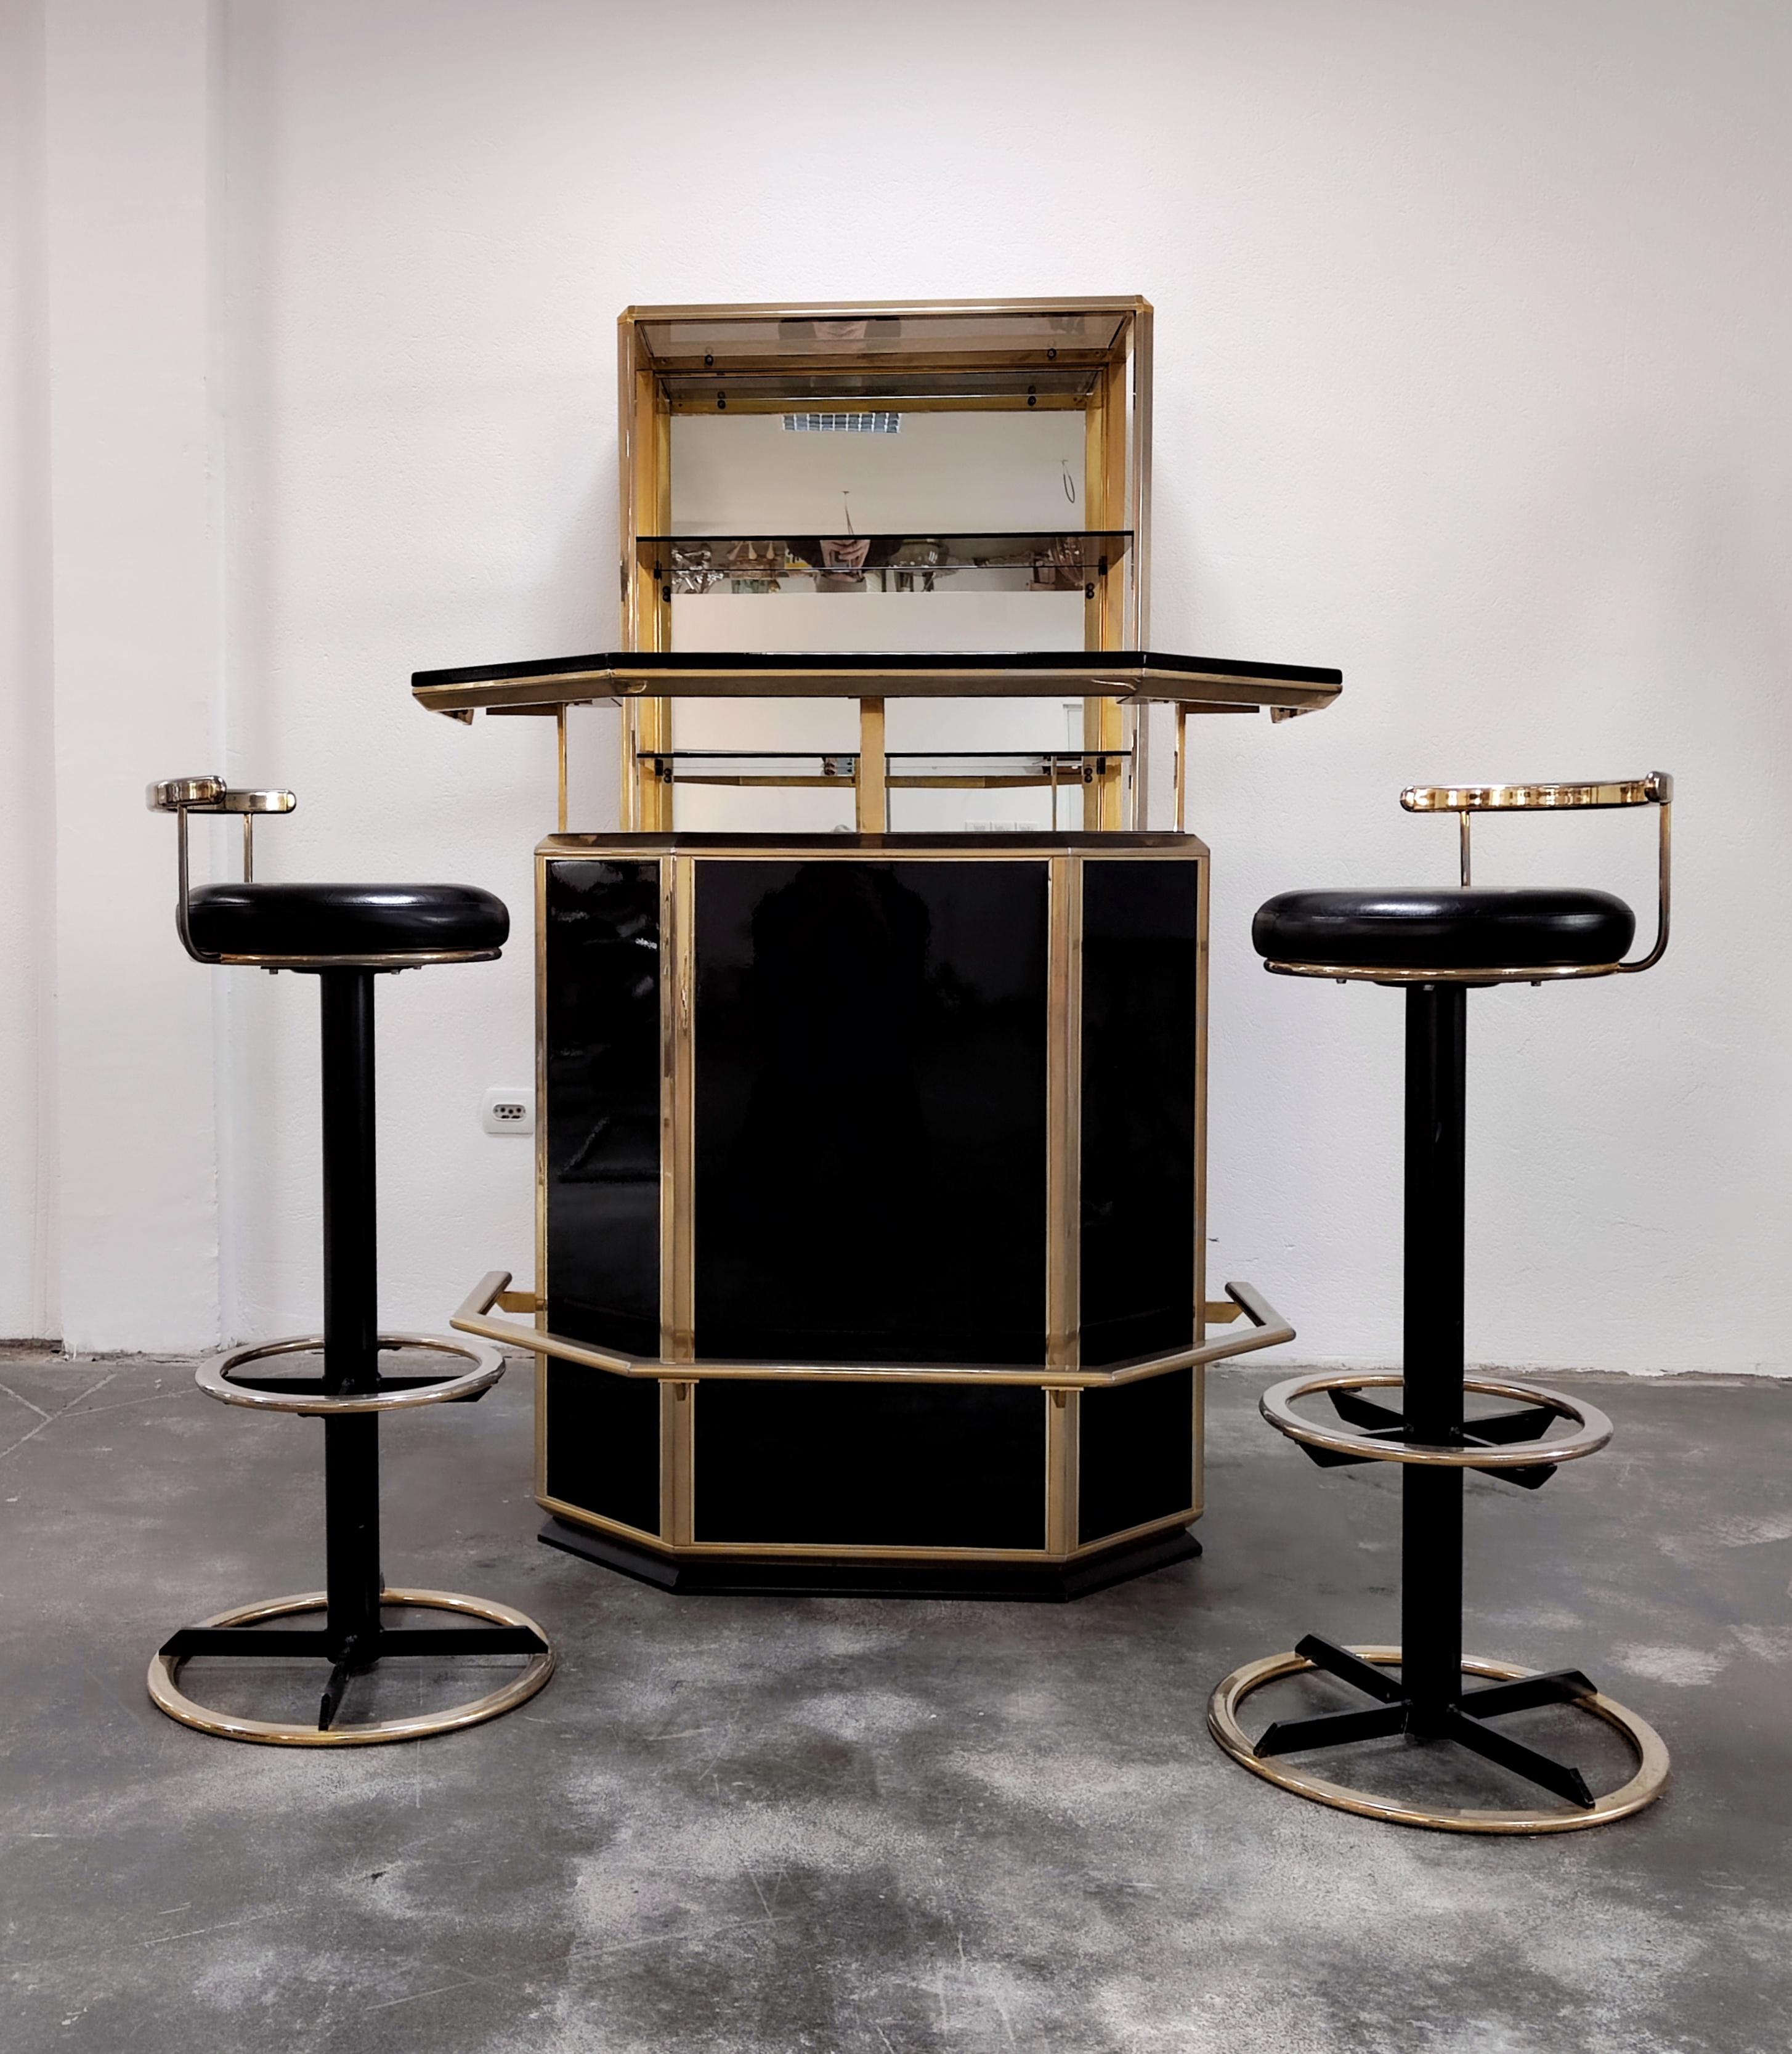 In this listing you will find a spectacular Hollywood Regency dry bar set, consisting of dry bar counter, two bar stools and the mirrored shelf for bottles and glasses. This high quality set is done in black lacquer wood, glossy and reflective,